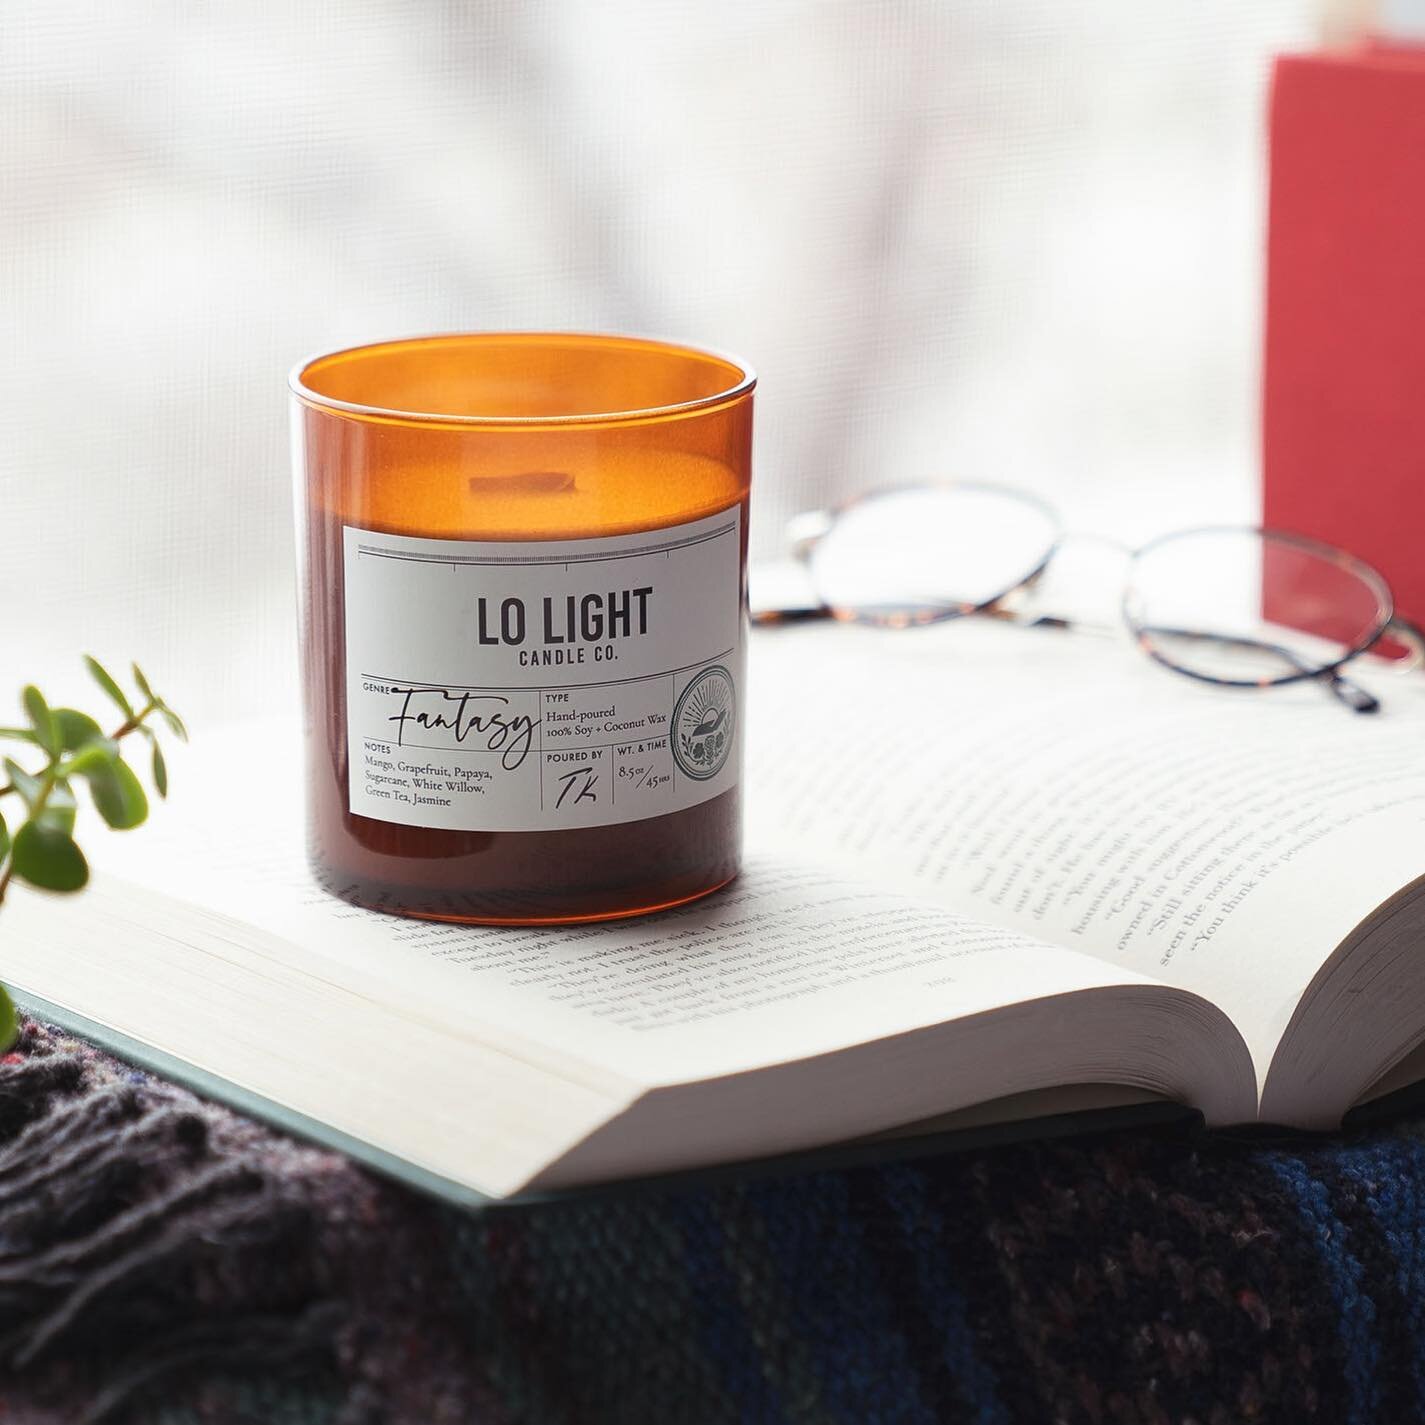 Our &lsquo;Fantasy&rsquo; candle pairs well with evening dragon rides and wizard mischief&mdash;or just daydreams about life in 2019.

.
.
.

#bookstagram #candles #harrypotter #lordoftherings #lolightcandleco #hygge #stephenking #booklover